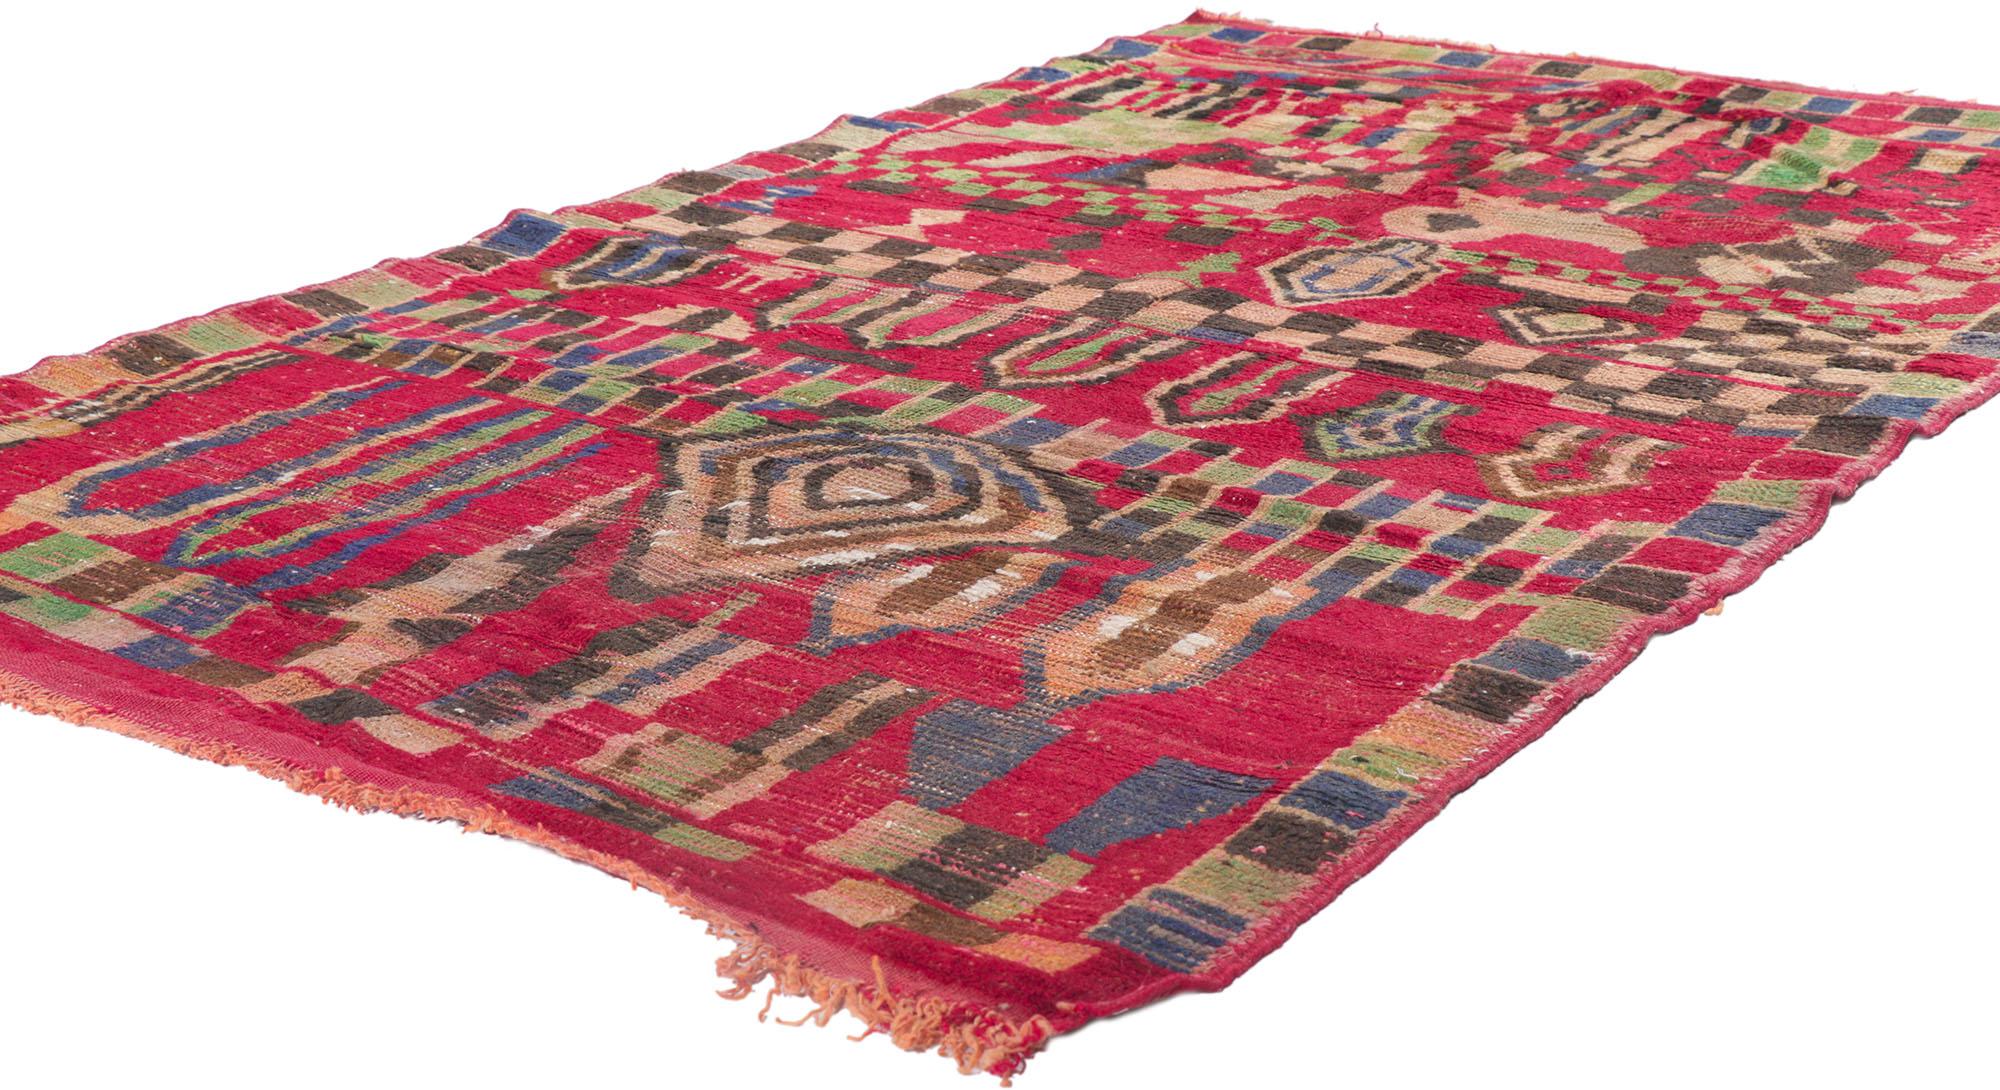 21494 Vintage Moroccan rug, 03'09 x 05'08. Showcasing an expressive design, incredible detail and texture, this hand knotted wool vintage Berber Moroccan rug is a captivating vision of woven beauty. The bold geometric pattern and vibrant colors